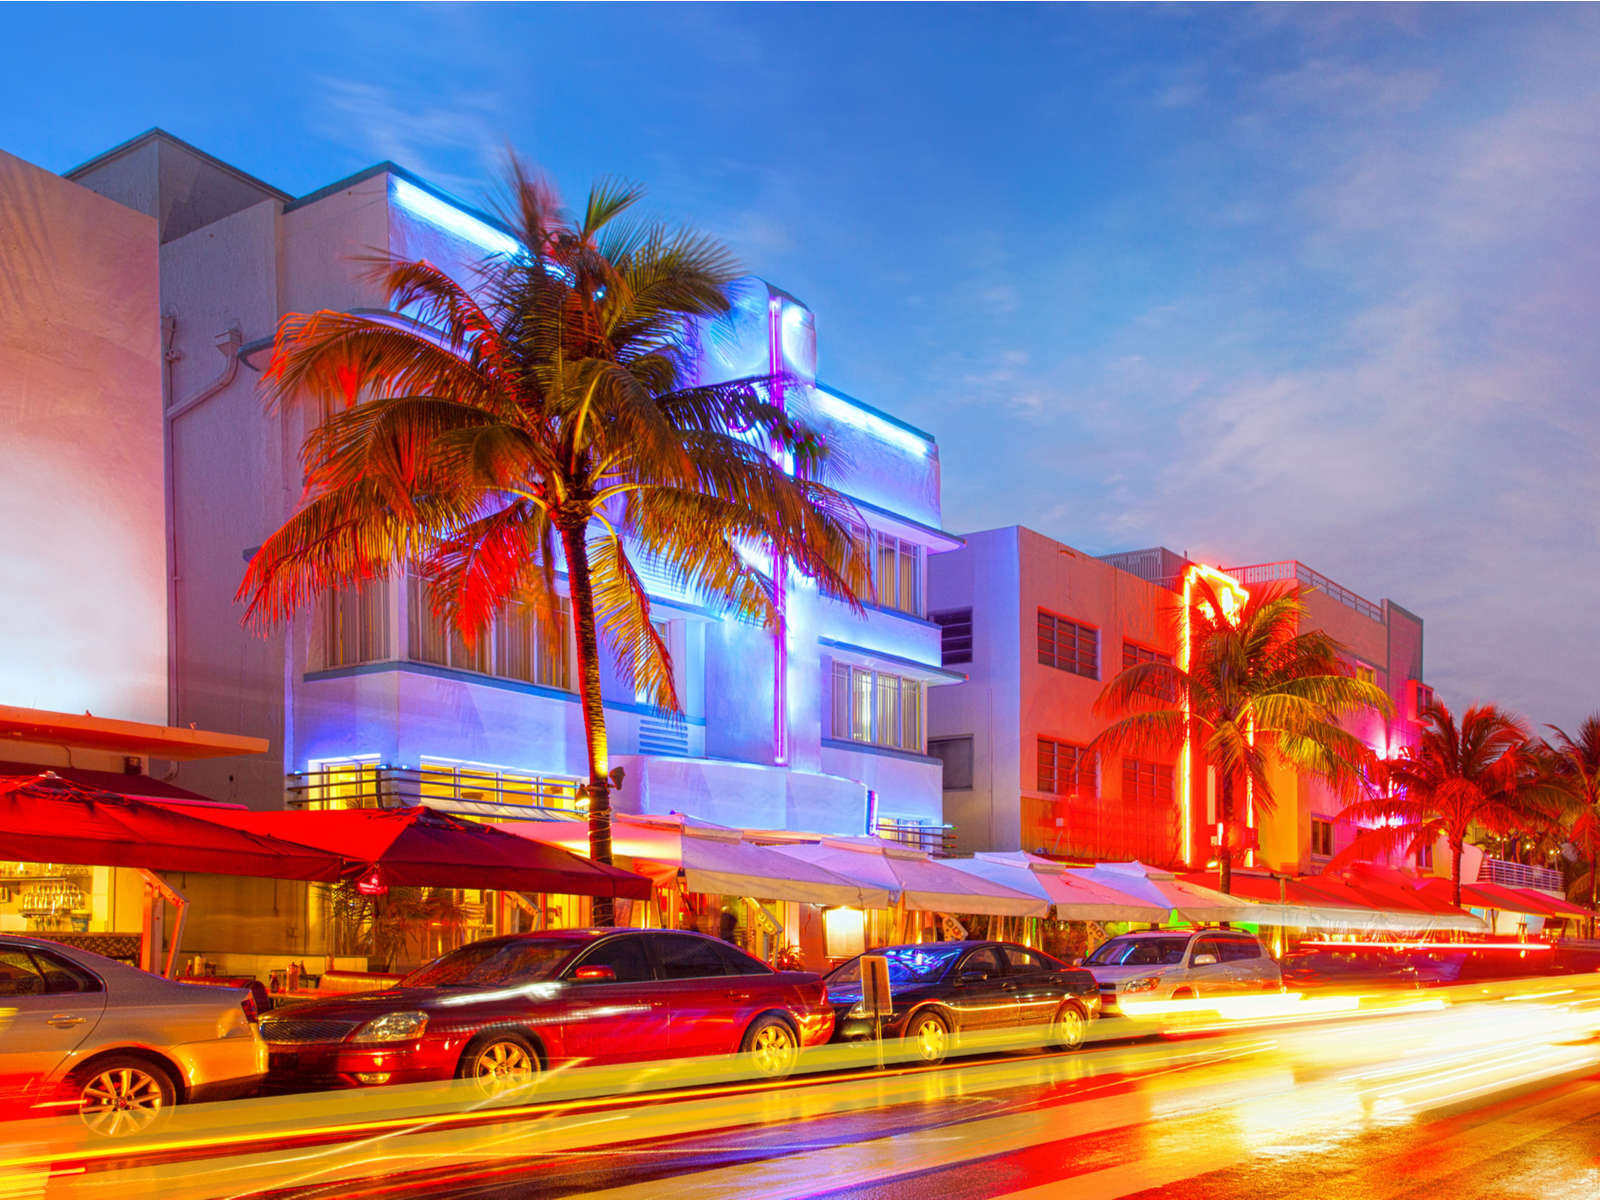 The downtown strip on Ocean Drive illuminated at night during the cheapest time to visit Miami